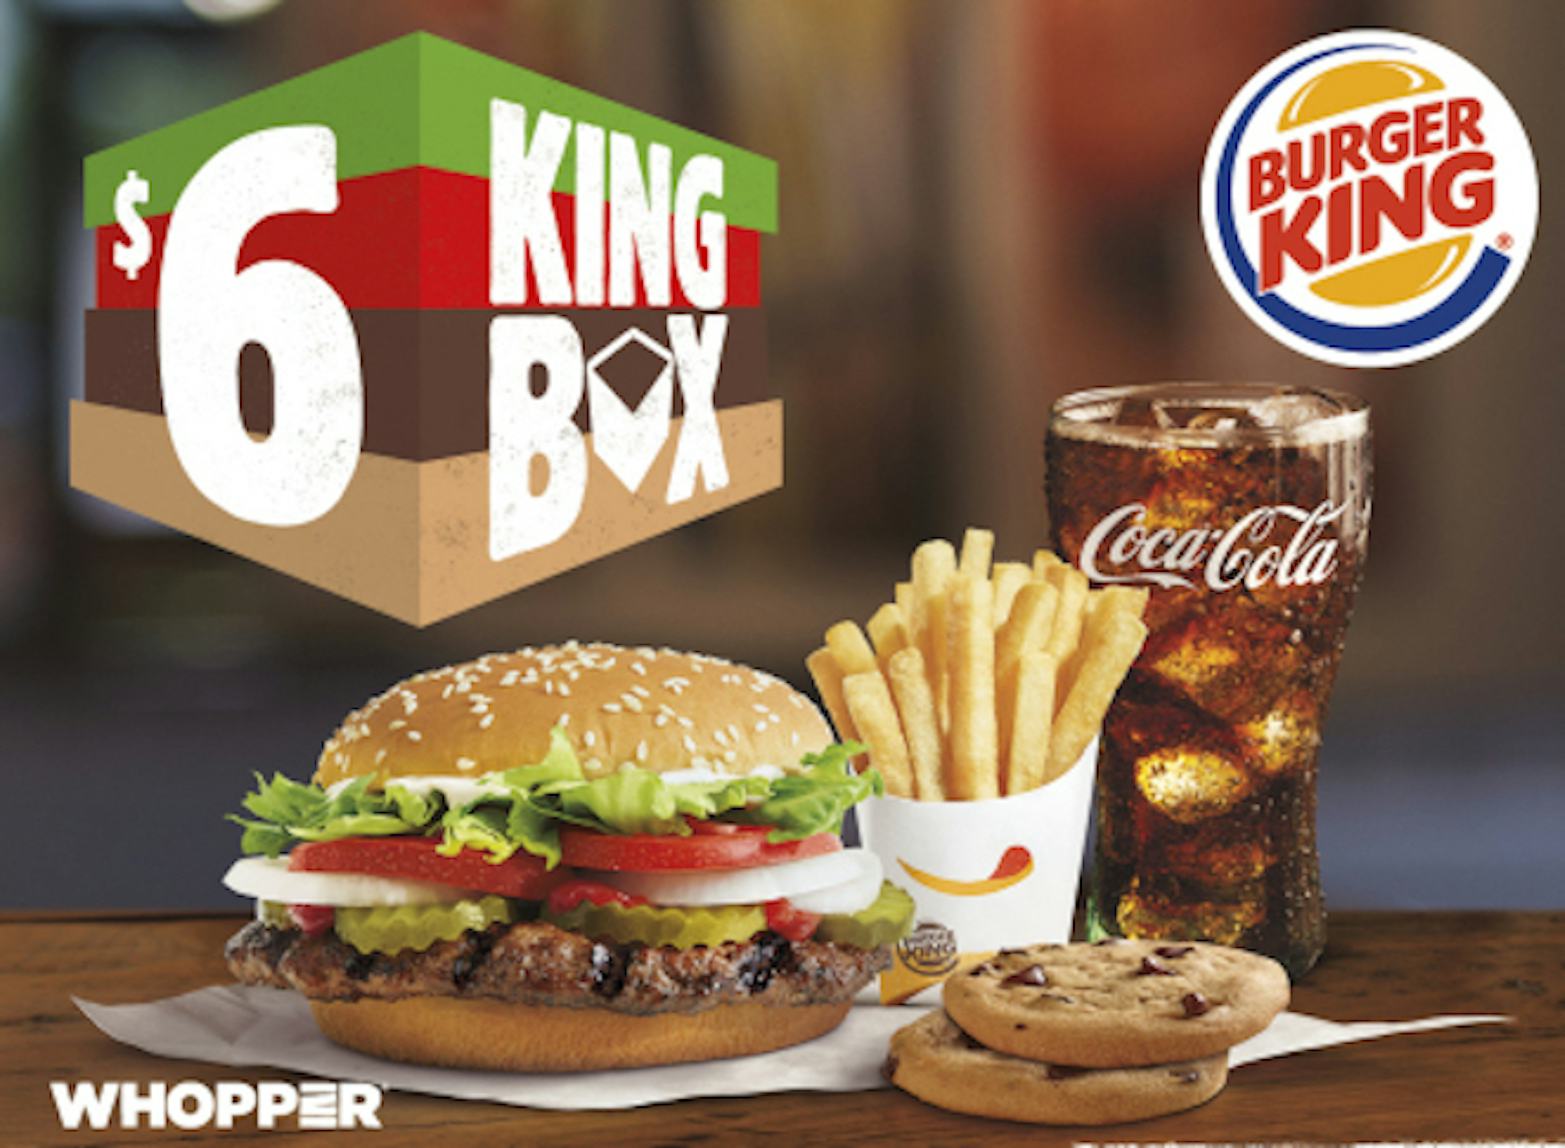 Burger Kings 6 King Box Is A Meal Deal To Treat Yourself On A Budget